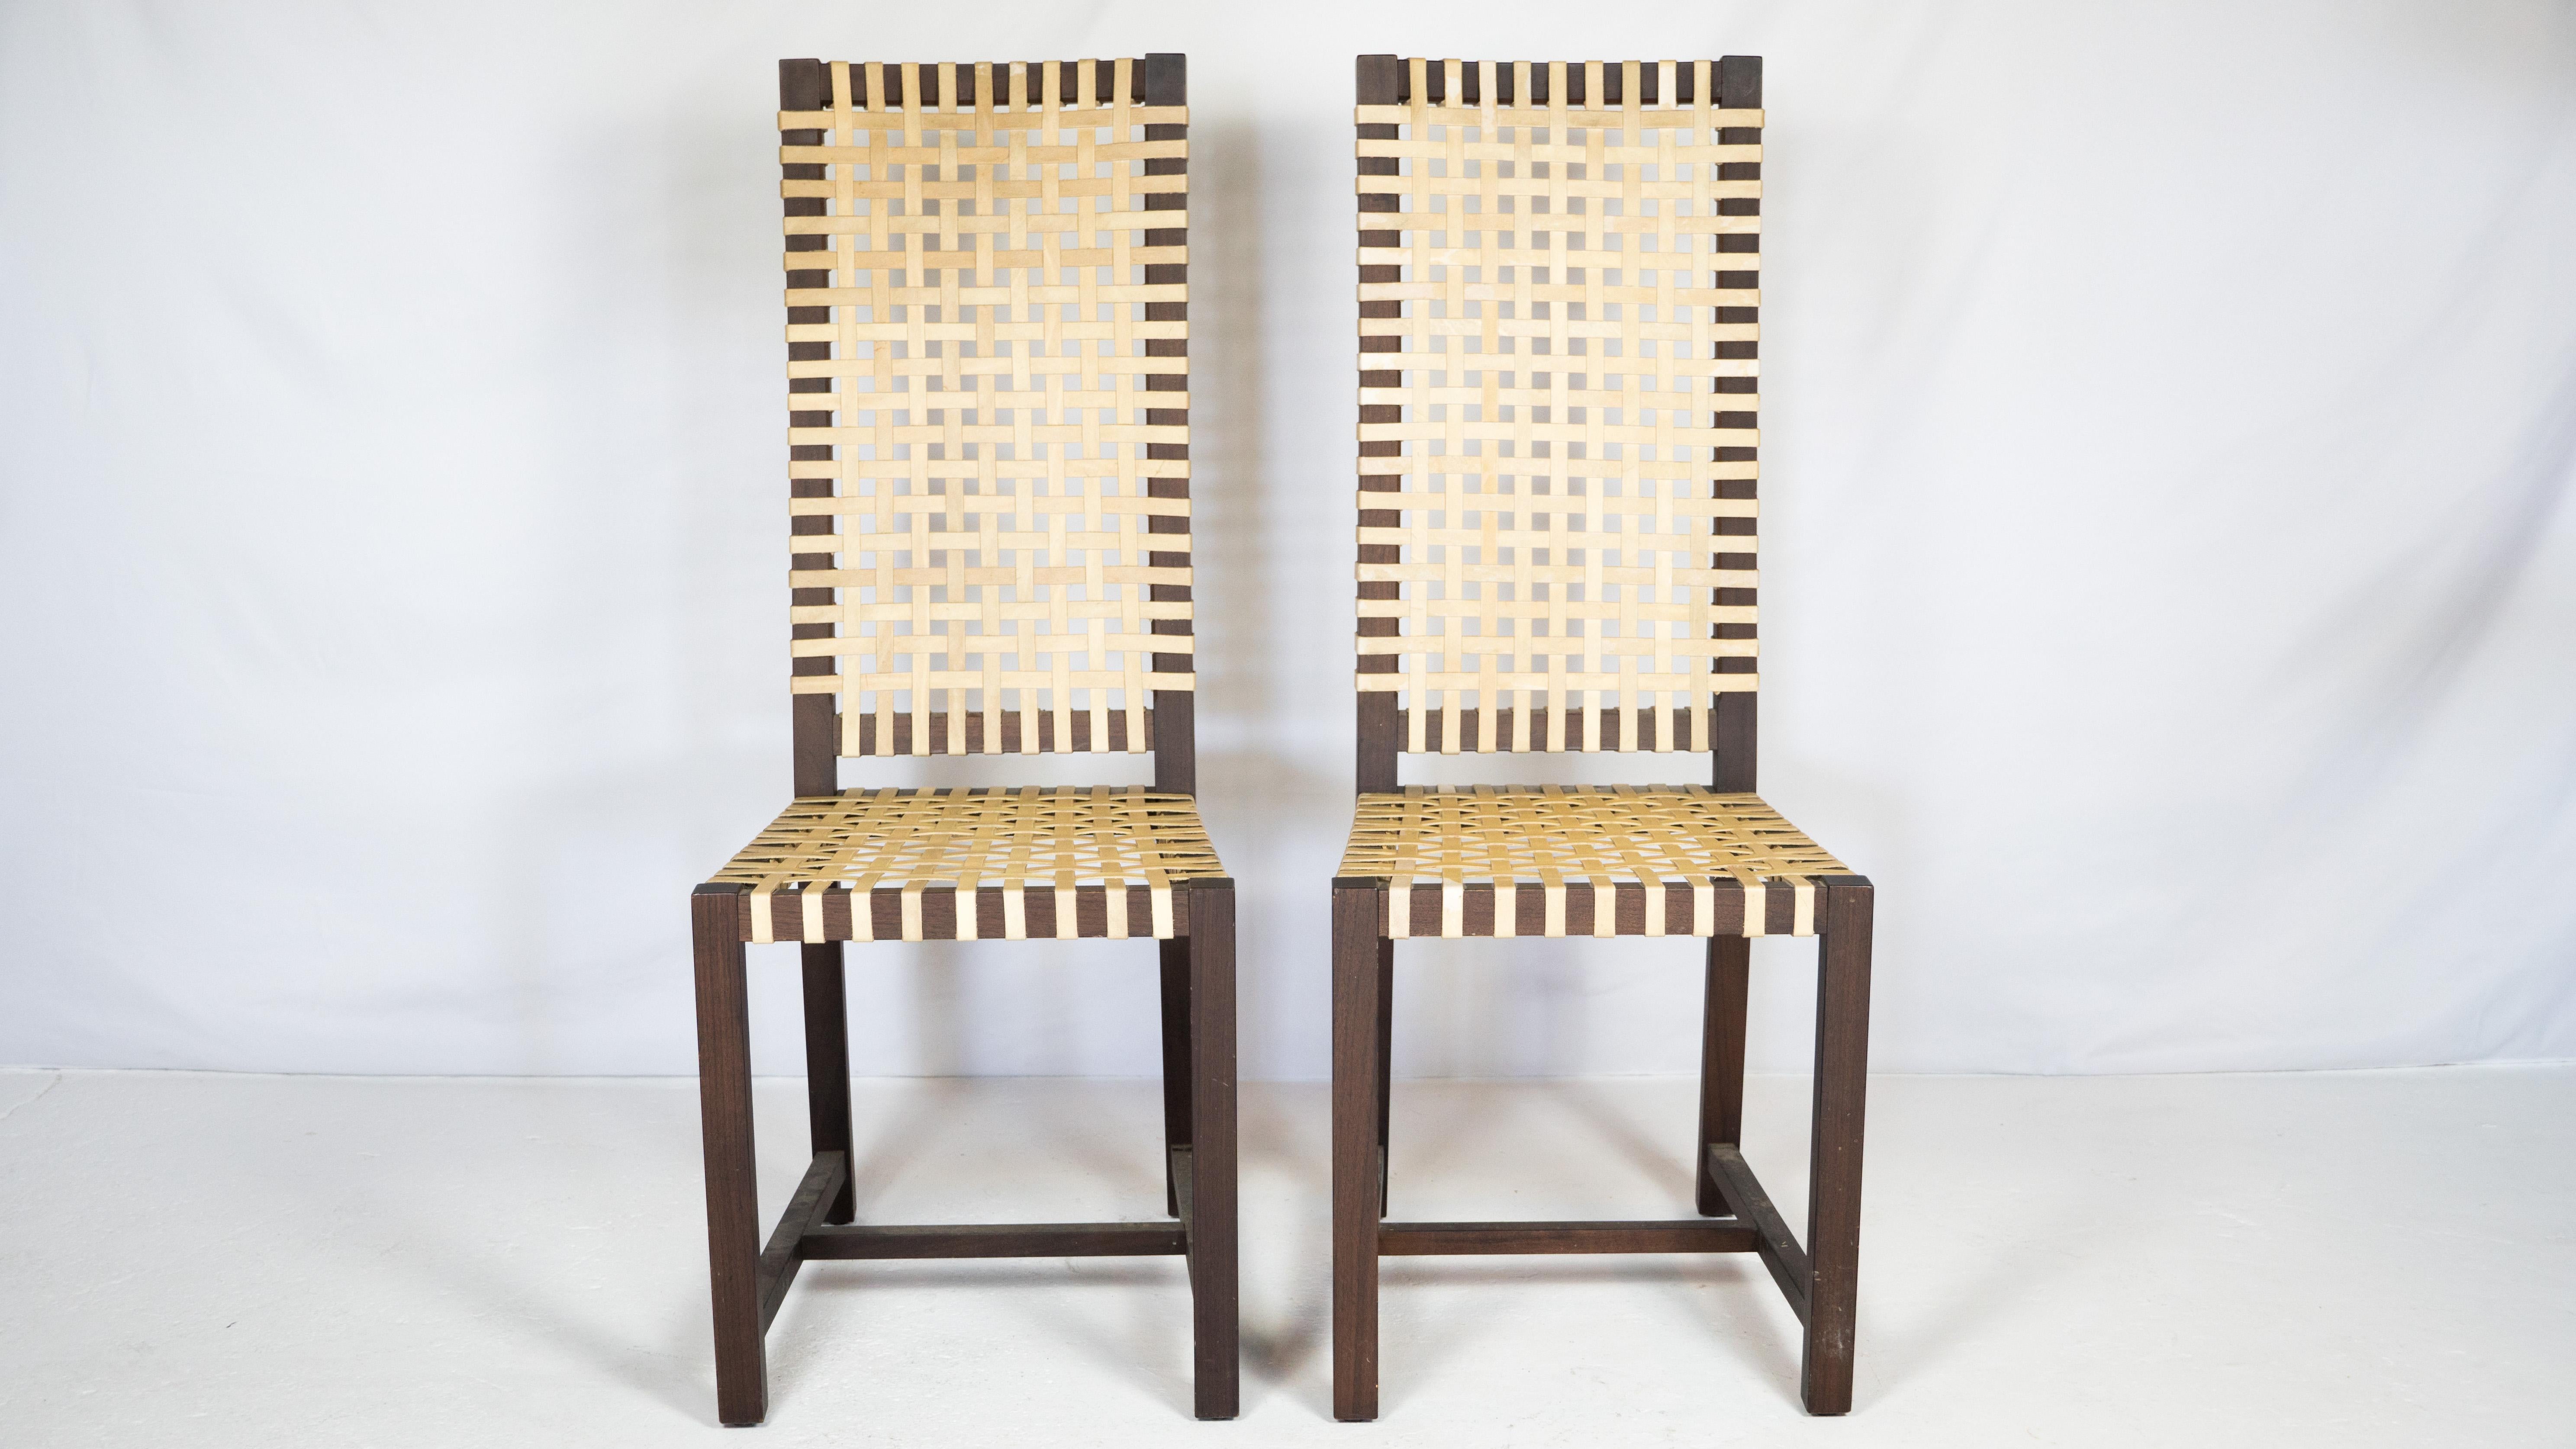 Pair of Italian architectural 'Otto 121' high back side chairs designed by Paola Navone for Gervasoni, circa 1990s. Perfect height for a writer's desk or corner accent chair or extra dining chairs. Woven straps support the seat and backrest. Frame